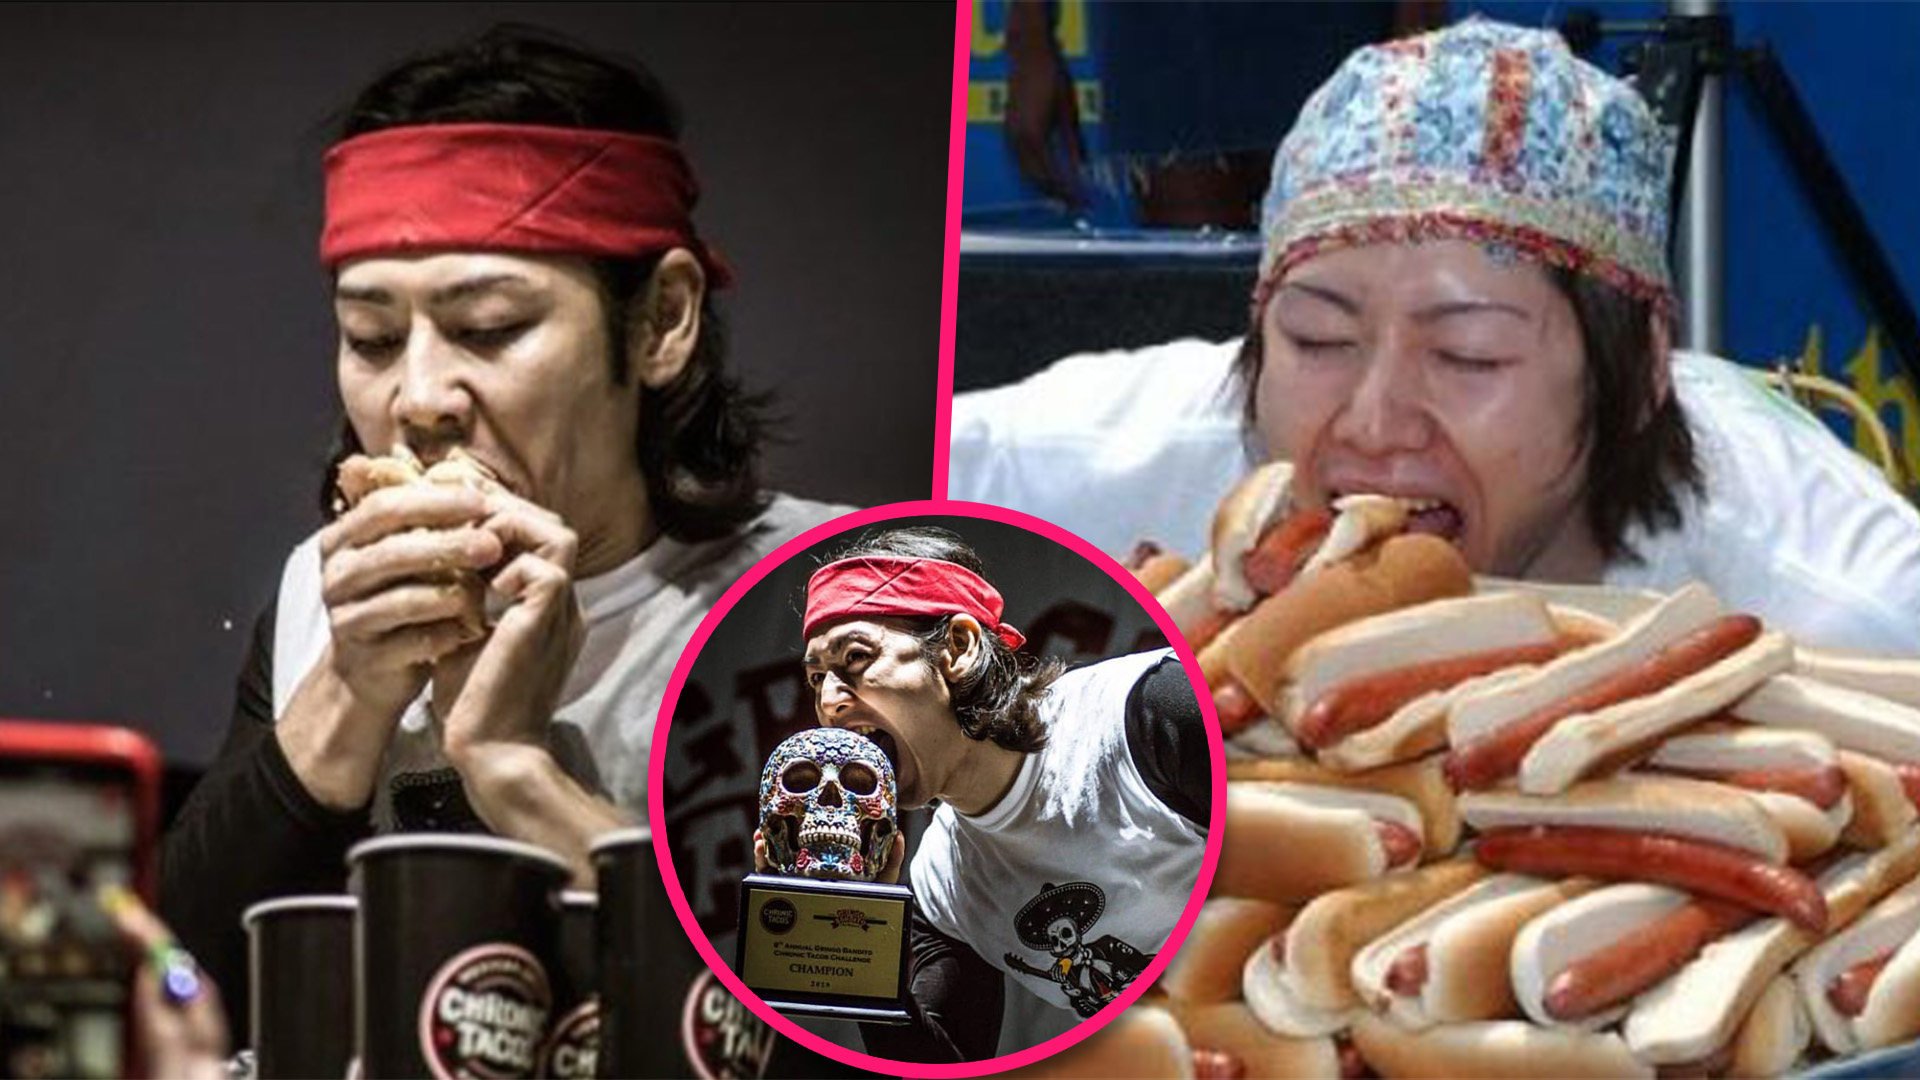 A world champion competitive eater from Japan has announced his retirement because he no longer feels hungry. Photo: SCMP composite/Instagram